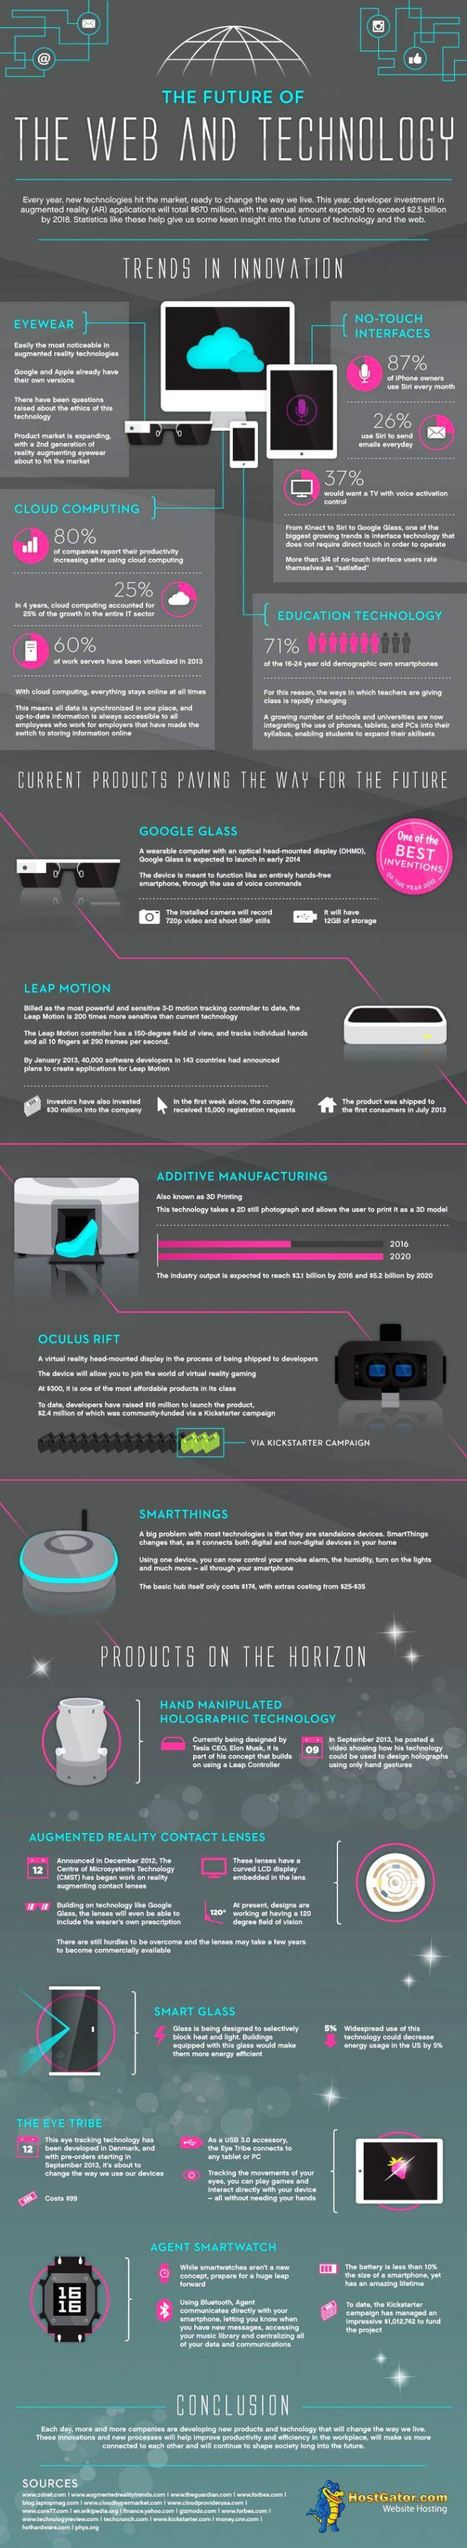 The Future of Web and Technology [Infographic] | Didactics and Technology in Education | Scoop.it